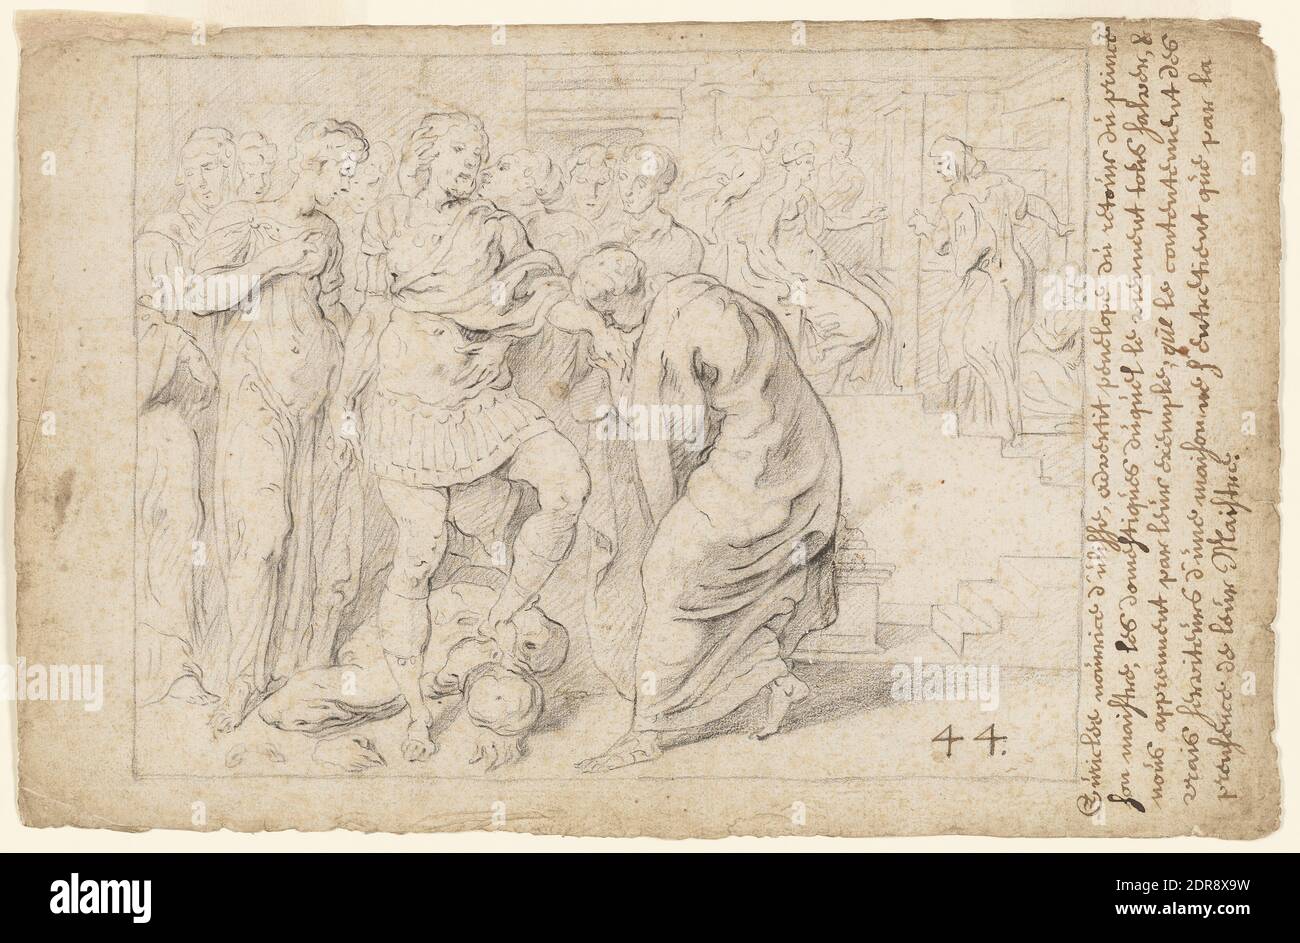 Artist: Theodore van Thulden, Flemish, 1606–1669, After: Francesco Primaticcio, Italian, 1504–1570, Ulysses receives the Homage of the Loyal Serving-Women, ca. 1632, Black chalk, Sheet: 17.8 × 30.5 cm (7 × 12in.); Framed: 39.37 × 52.07 cm (15 1/2 × 20 1/2in.), This is one of Theodoor van Thulden’s preparatory studies for his set of prints after Francesco Primaticcio’s frescoes in the Gallery of Ulysses at Fontainebleau, which was published in multiple editions by various publishers between 1633 and 1640. This drawing depicts three episodes from Ulysses’ return home Stock Photo